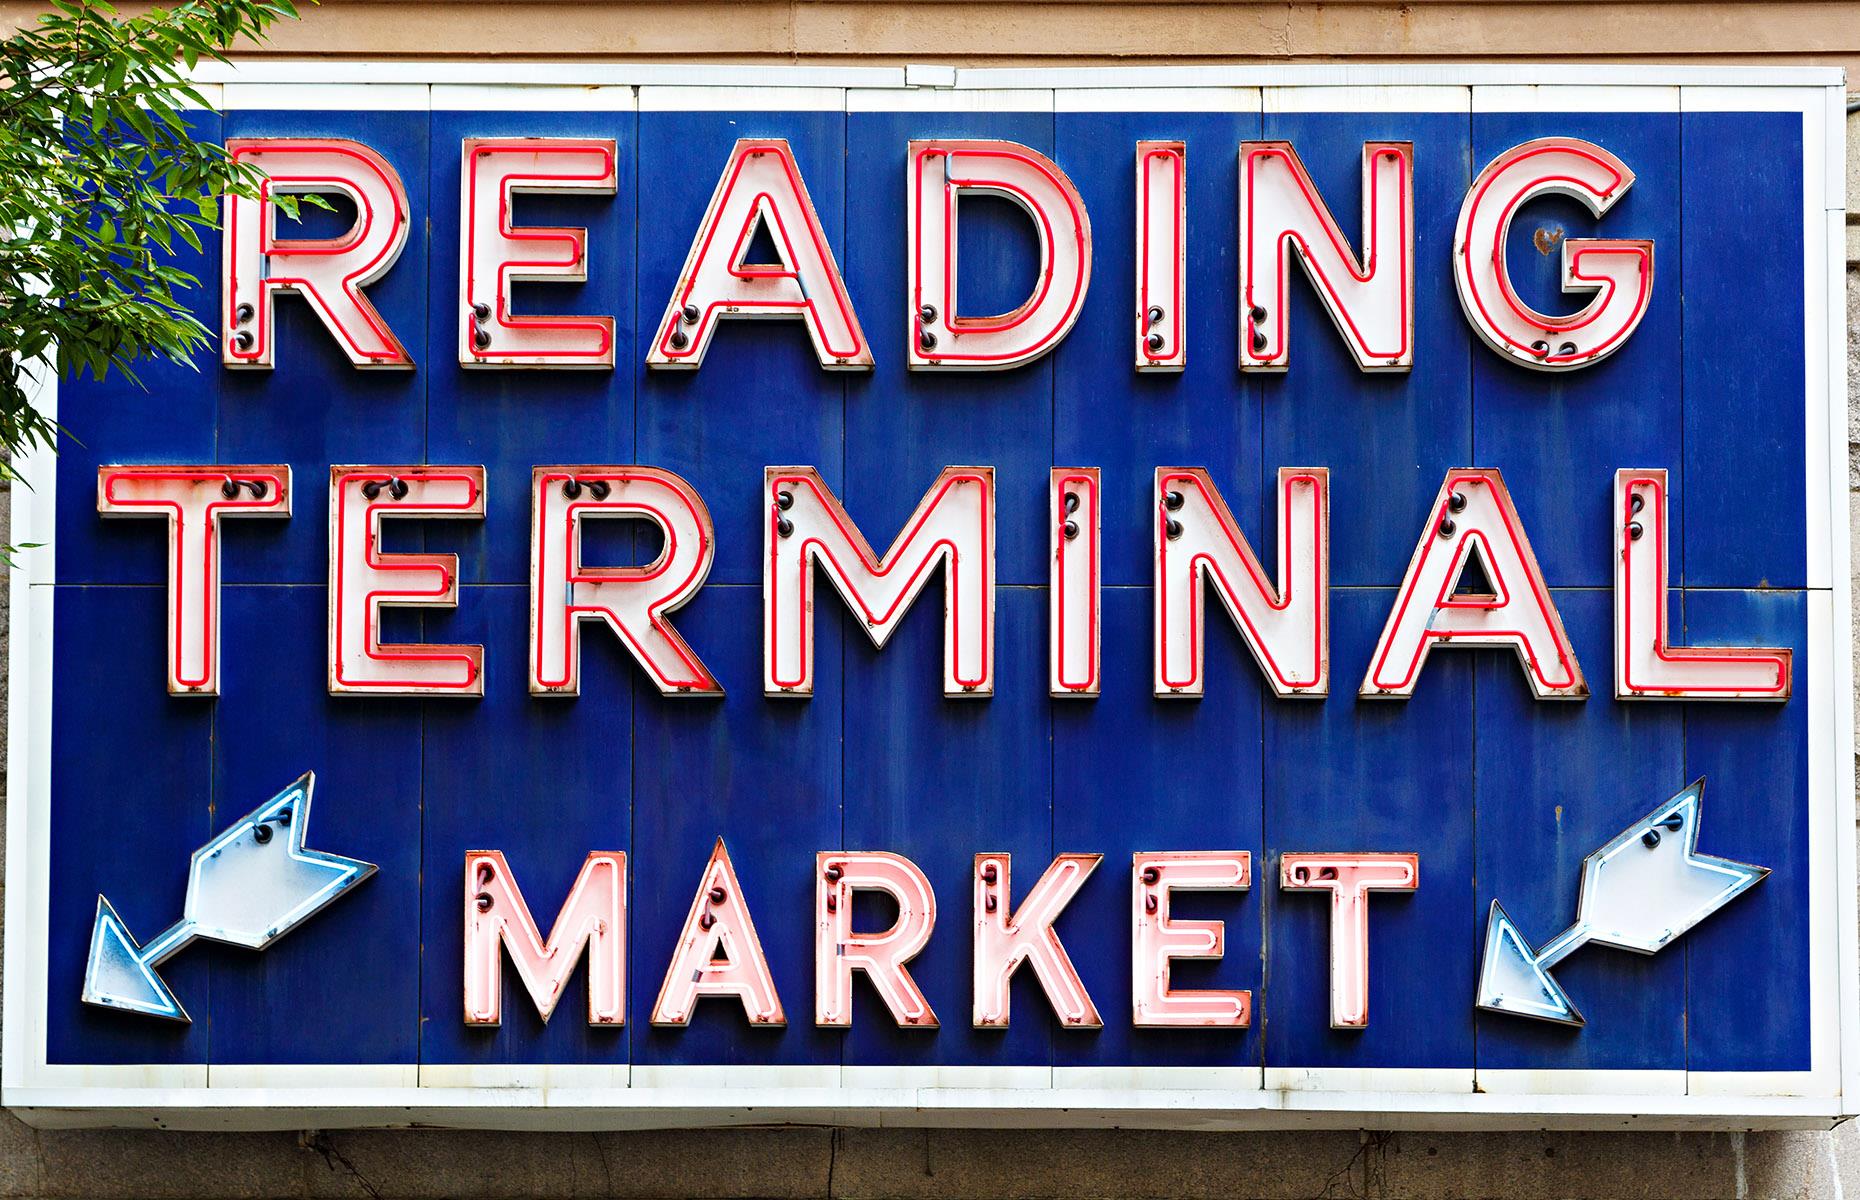 <p><a href="https://www.phlvisitorcenter.com/reading-terminal-market-food-tour">This local-led tour</a> is operated out of Reading Terminal Market. Its leader, Carolyn Wyman, wrote an entire book about the Philly cheesesteak so she knows her stuff. You'll sample Philly classics like scrapple, pretzels and the famed cheesesteak itself.</p>  <p><a href="https://www.loveexploring.com/news/148505/philadelphia-things-to-do-museums-food-rocky-pennsylvania-liberty-bell"><strong>6 of the best things to do in Philadelphia</strong></a></p>